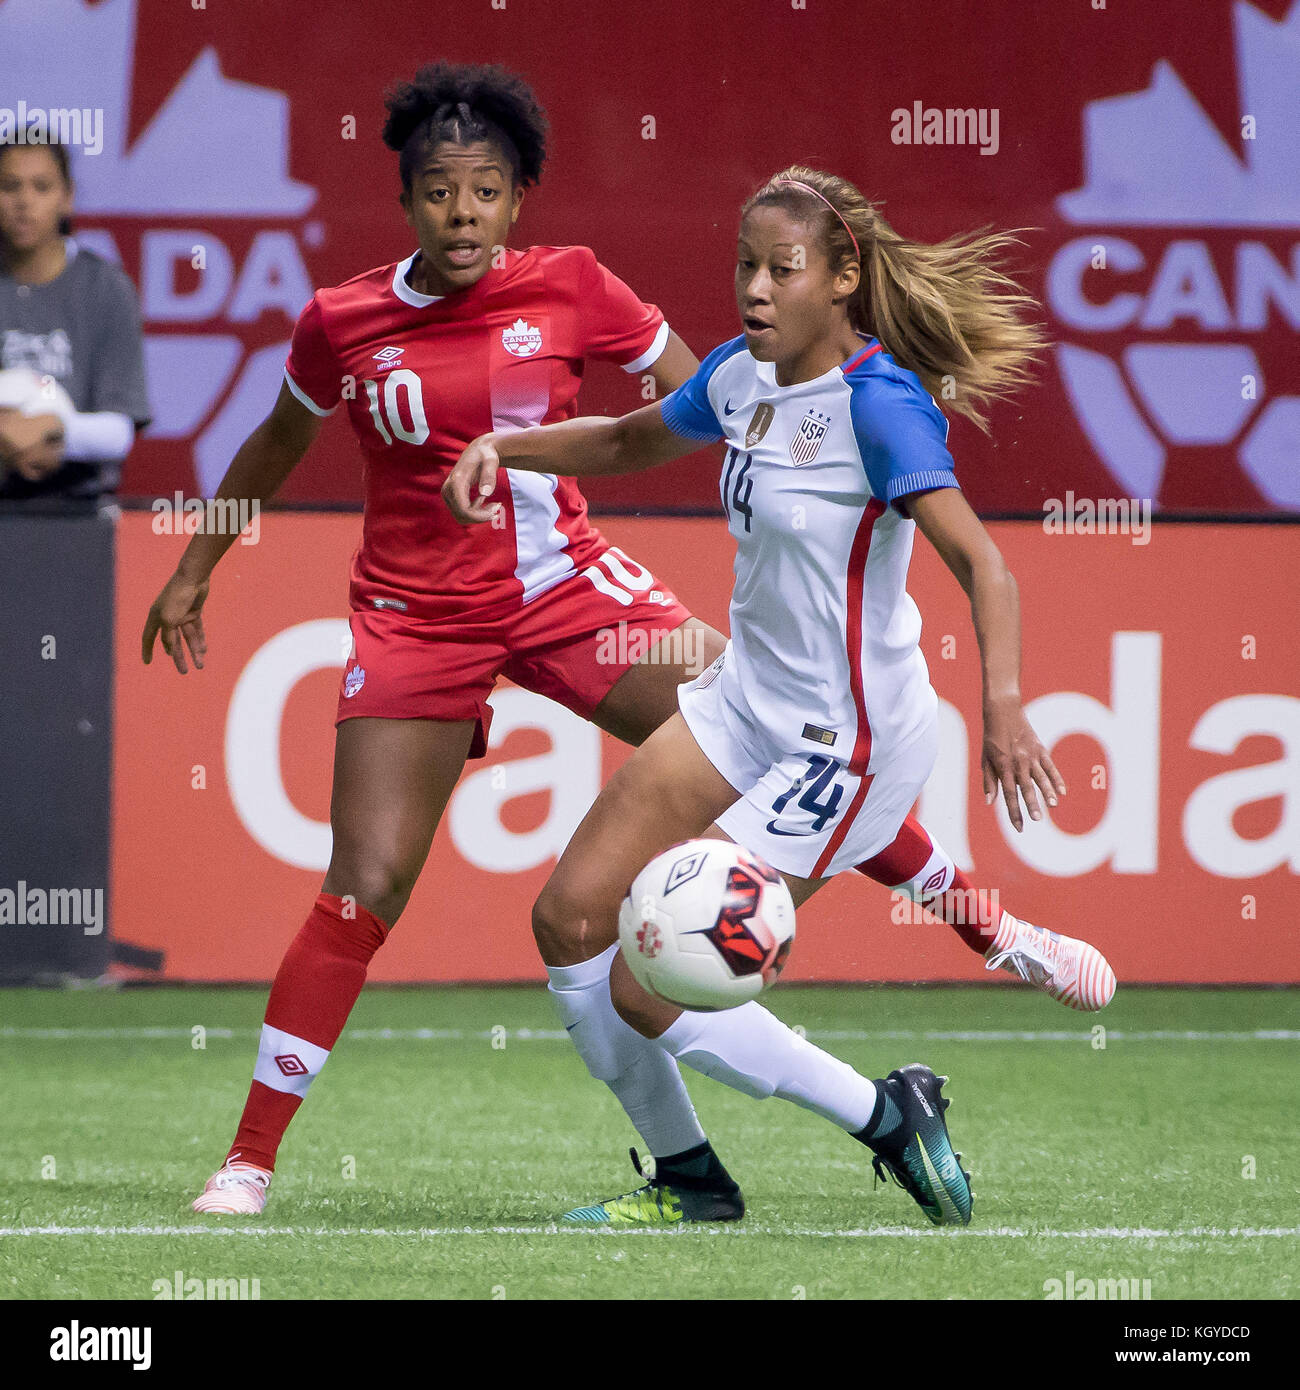 Vancouver, Canada. 09th Nov, 2017. Team Canada Ashley Lawrence (10) and  Team USA Casey Short (14) in game action during the women's soccer game  between Canada and USA at the BC Place